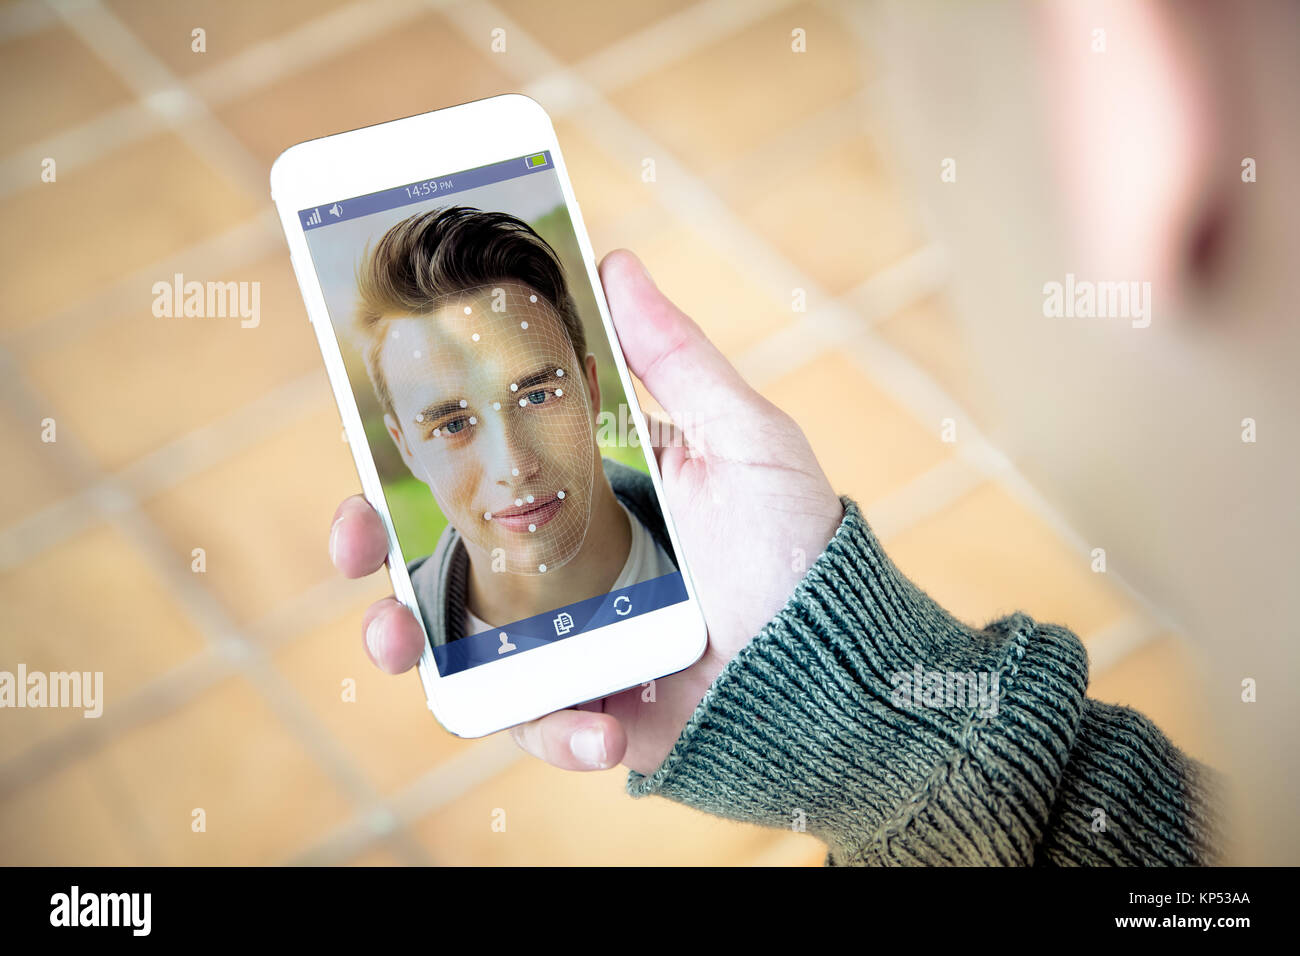 millennial using face id technology on smartphone Stock Photo